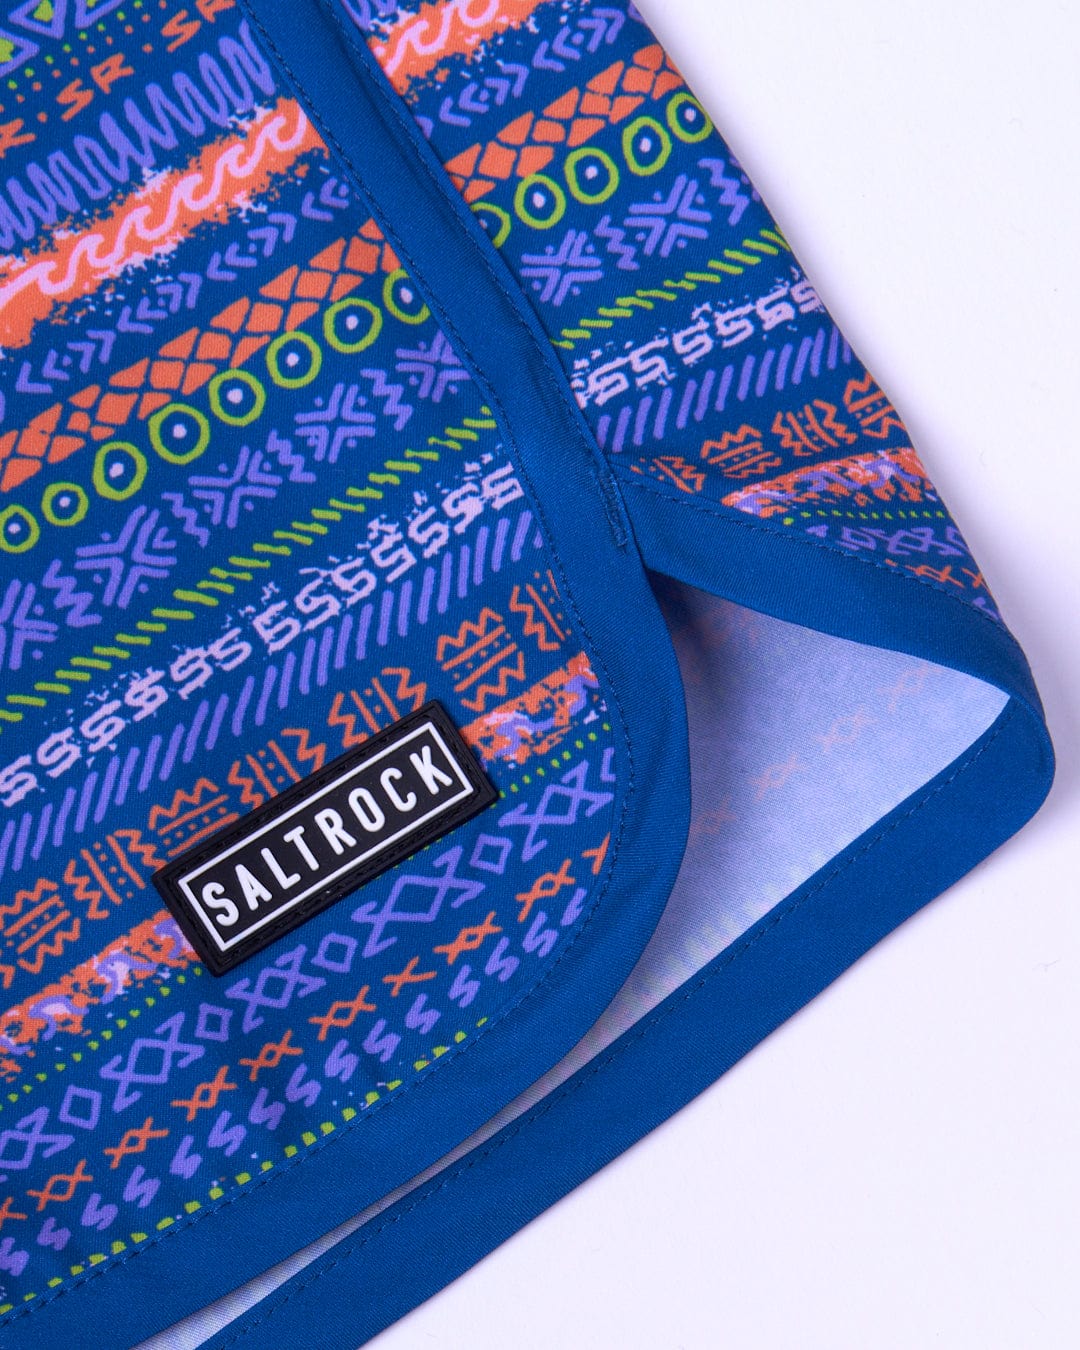 A Silas boardshorts made from Repreve recycled material with a colorful pattern by Saltrock.